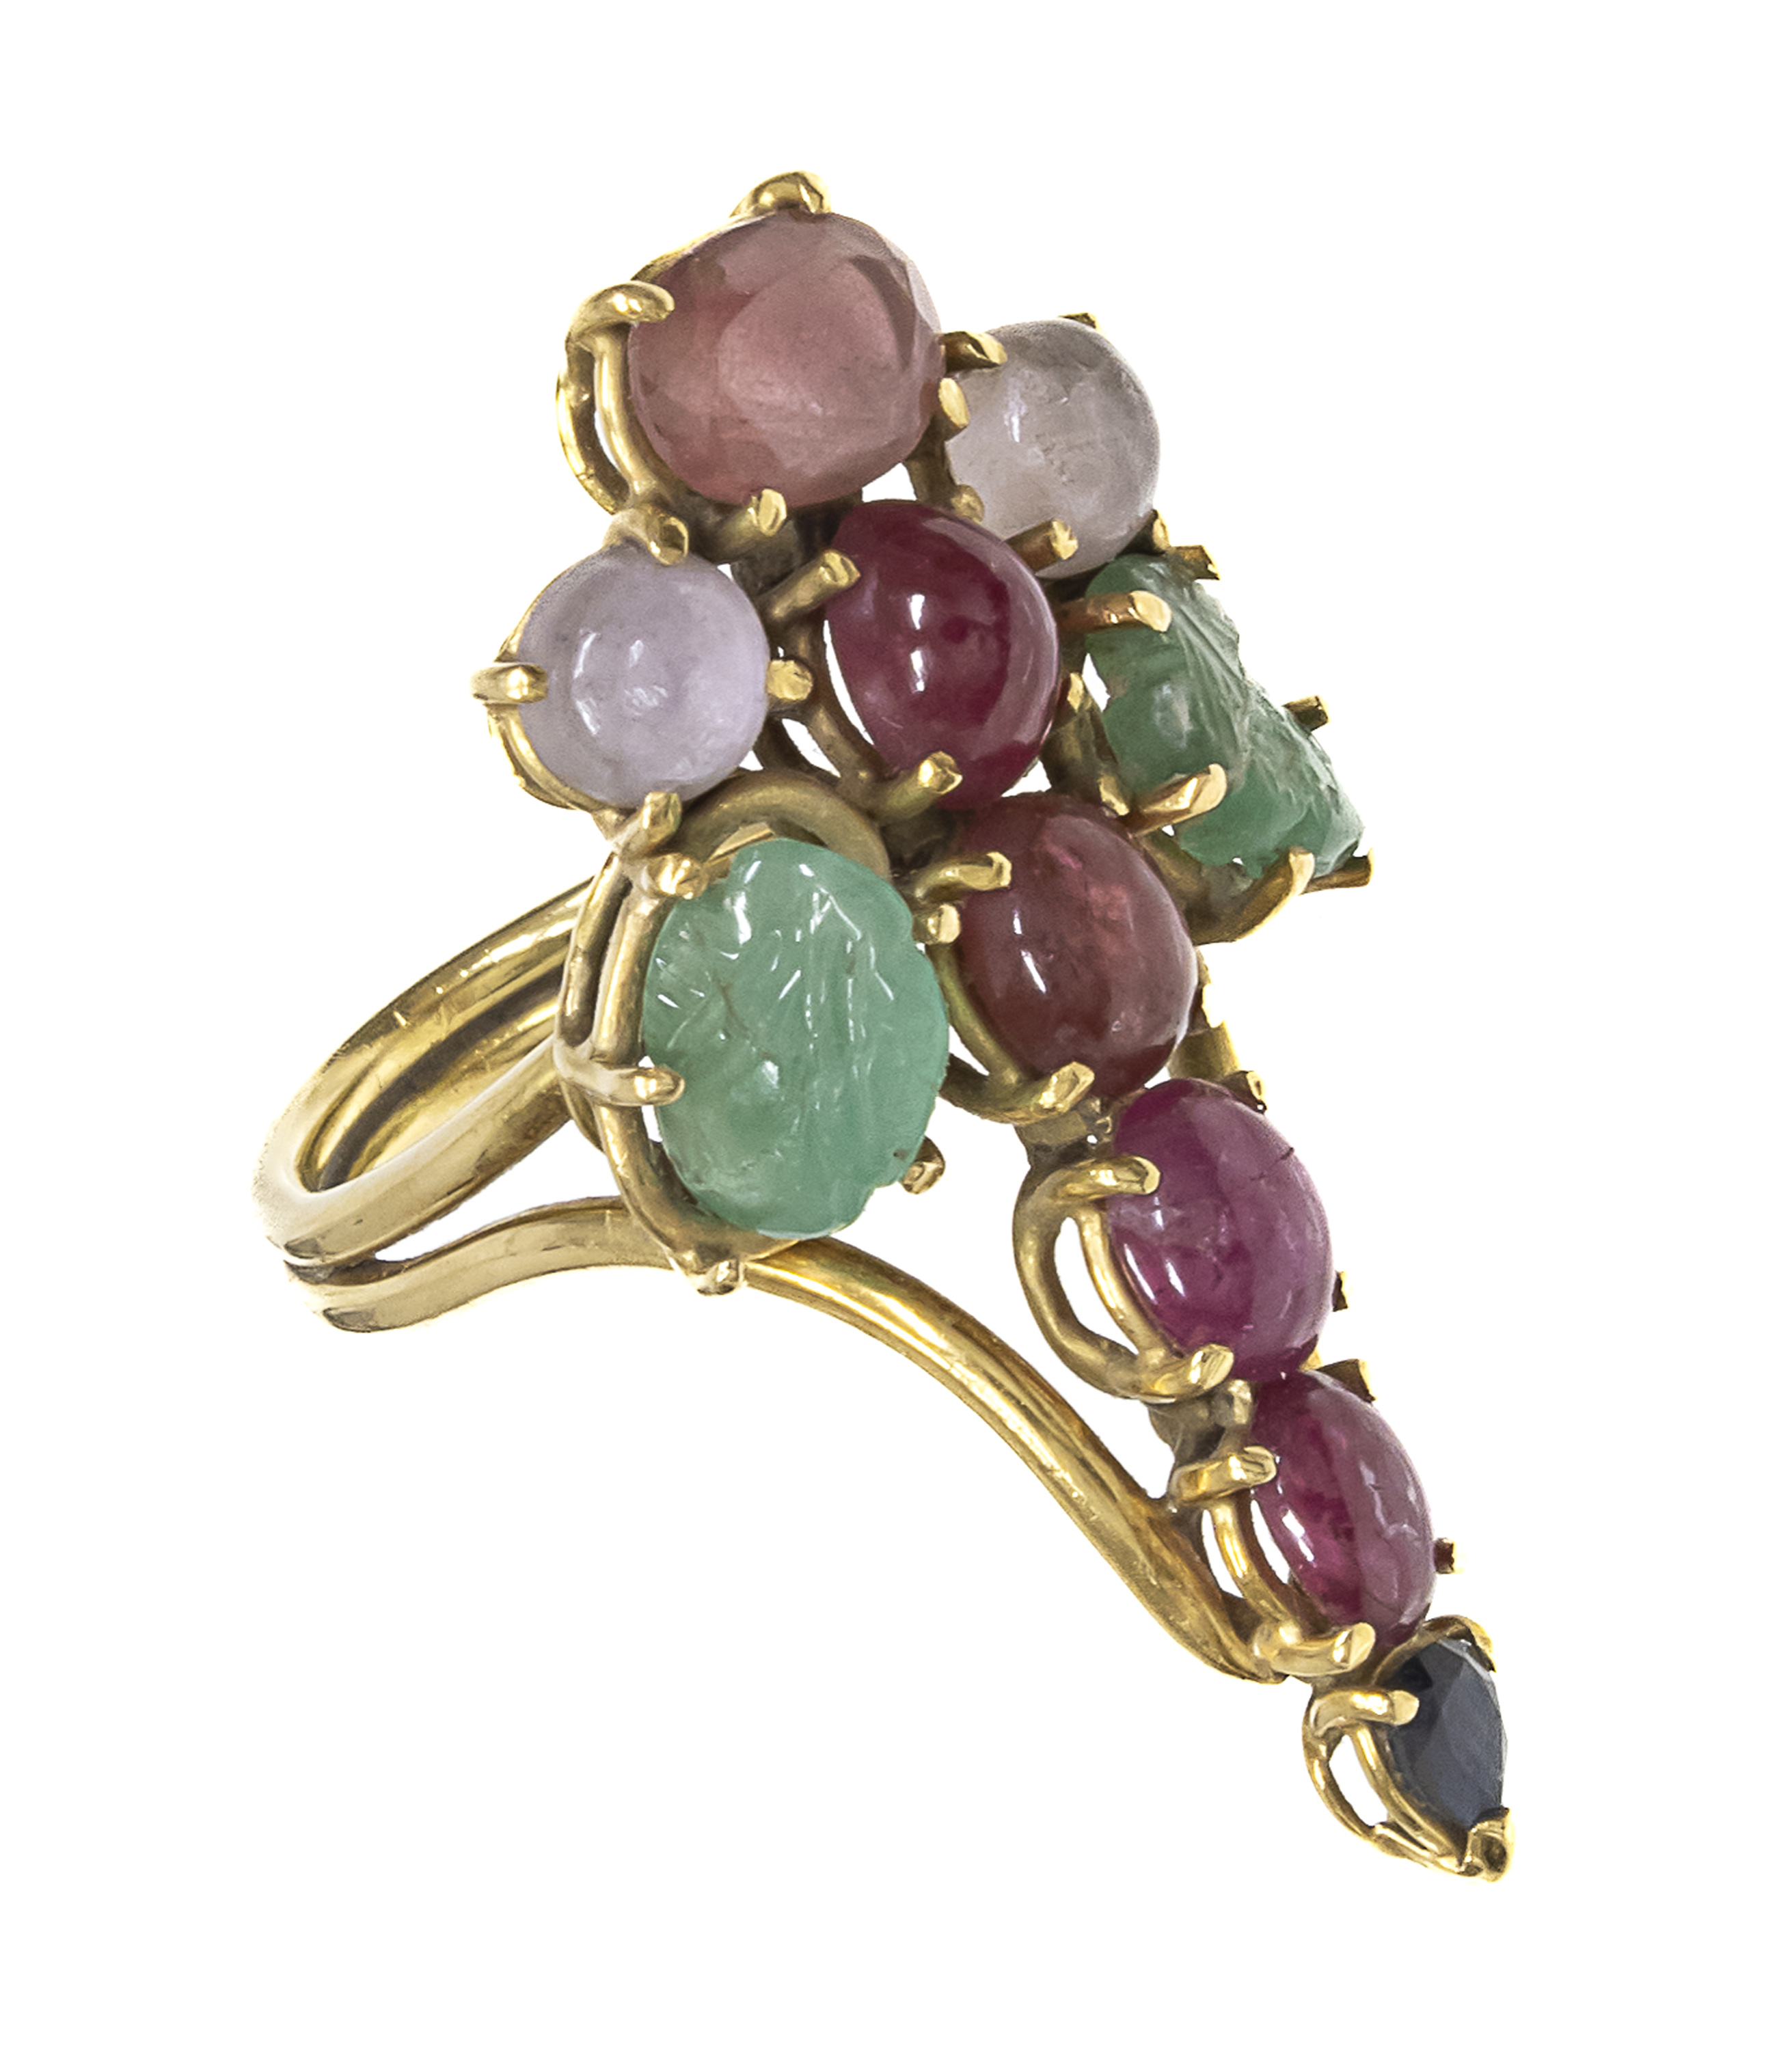 GOLD FANTASY RING WITH RUBIES SAPPHIRES AND HARDSTONES